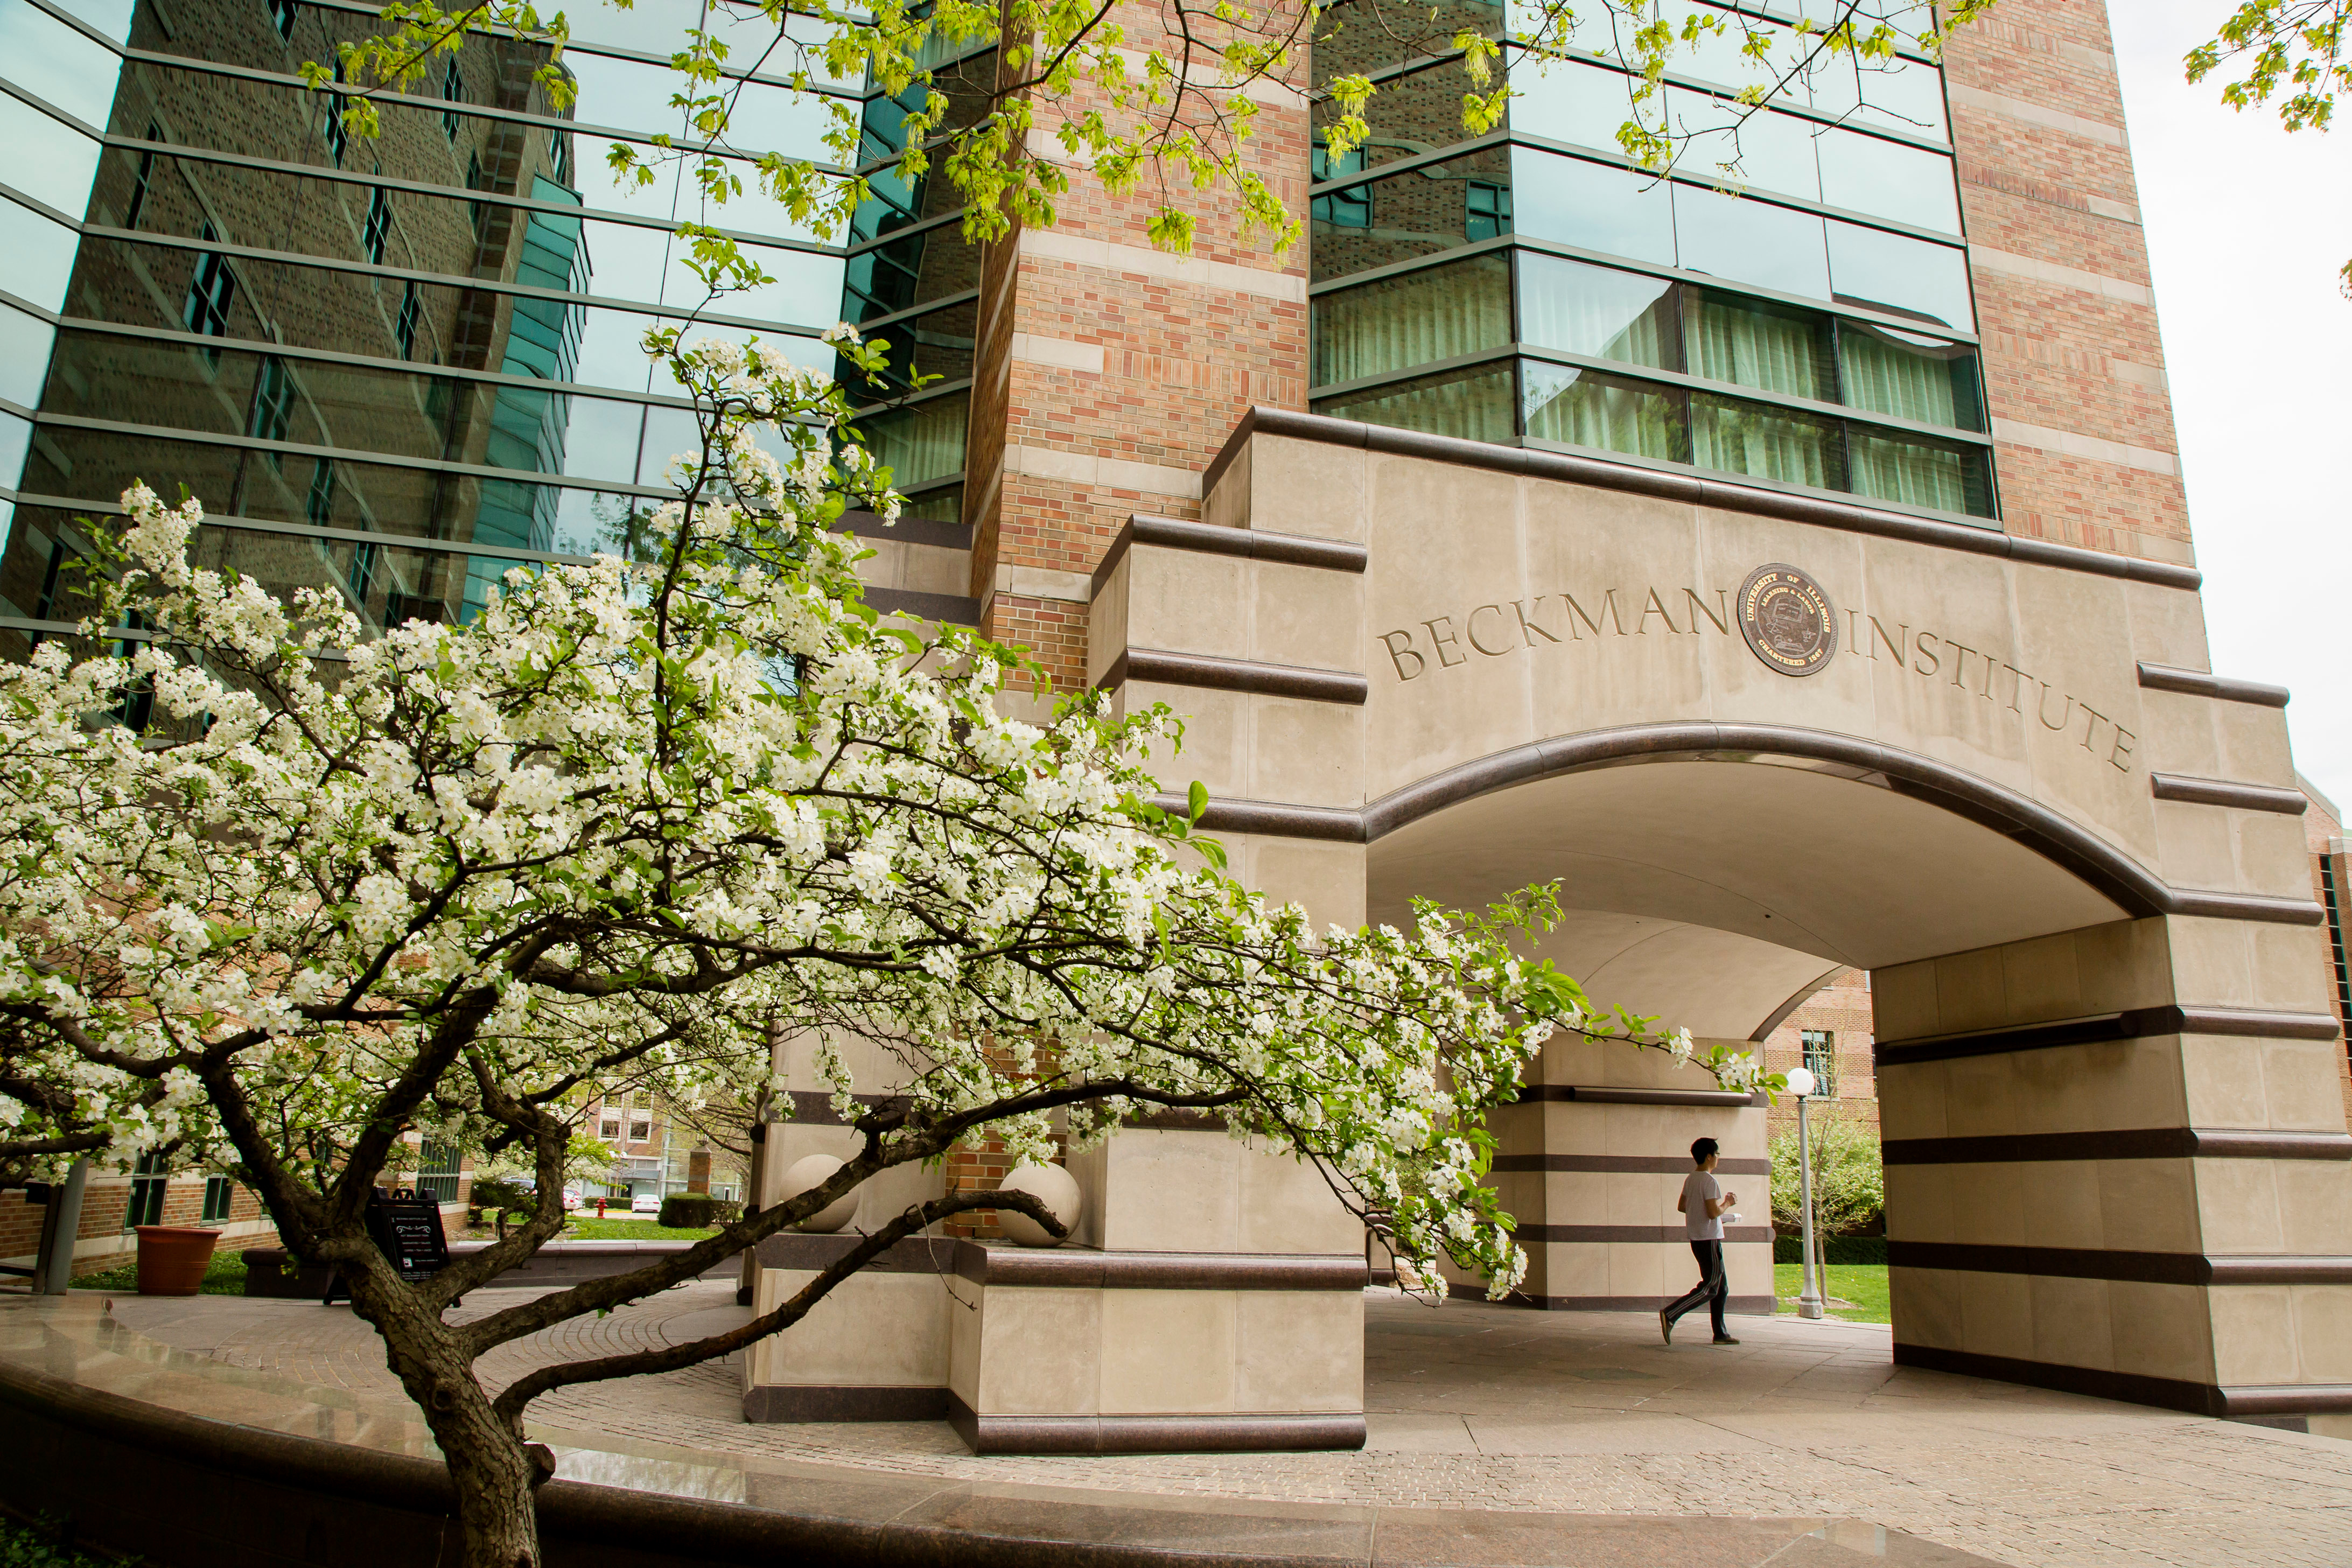 The Beckman Institute's south-facing entrance in springtime, featuring a blossoming tree in front.